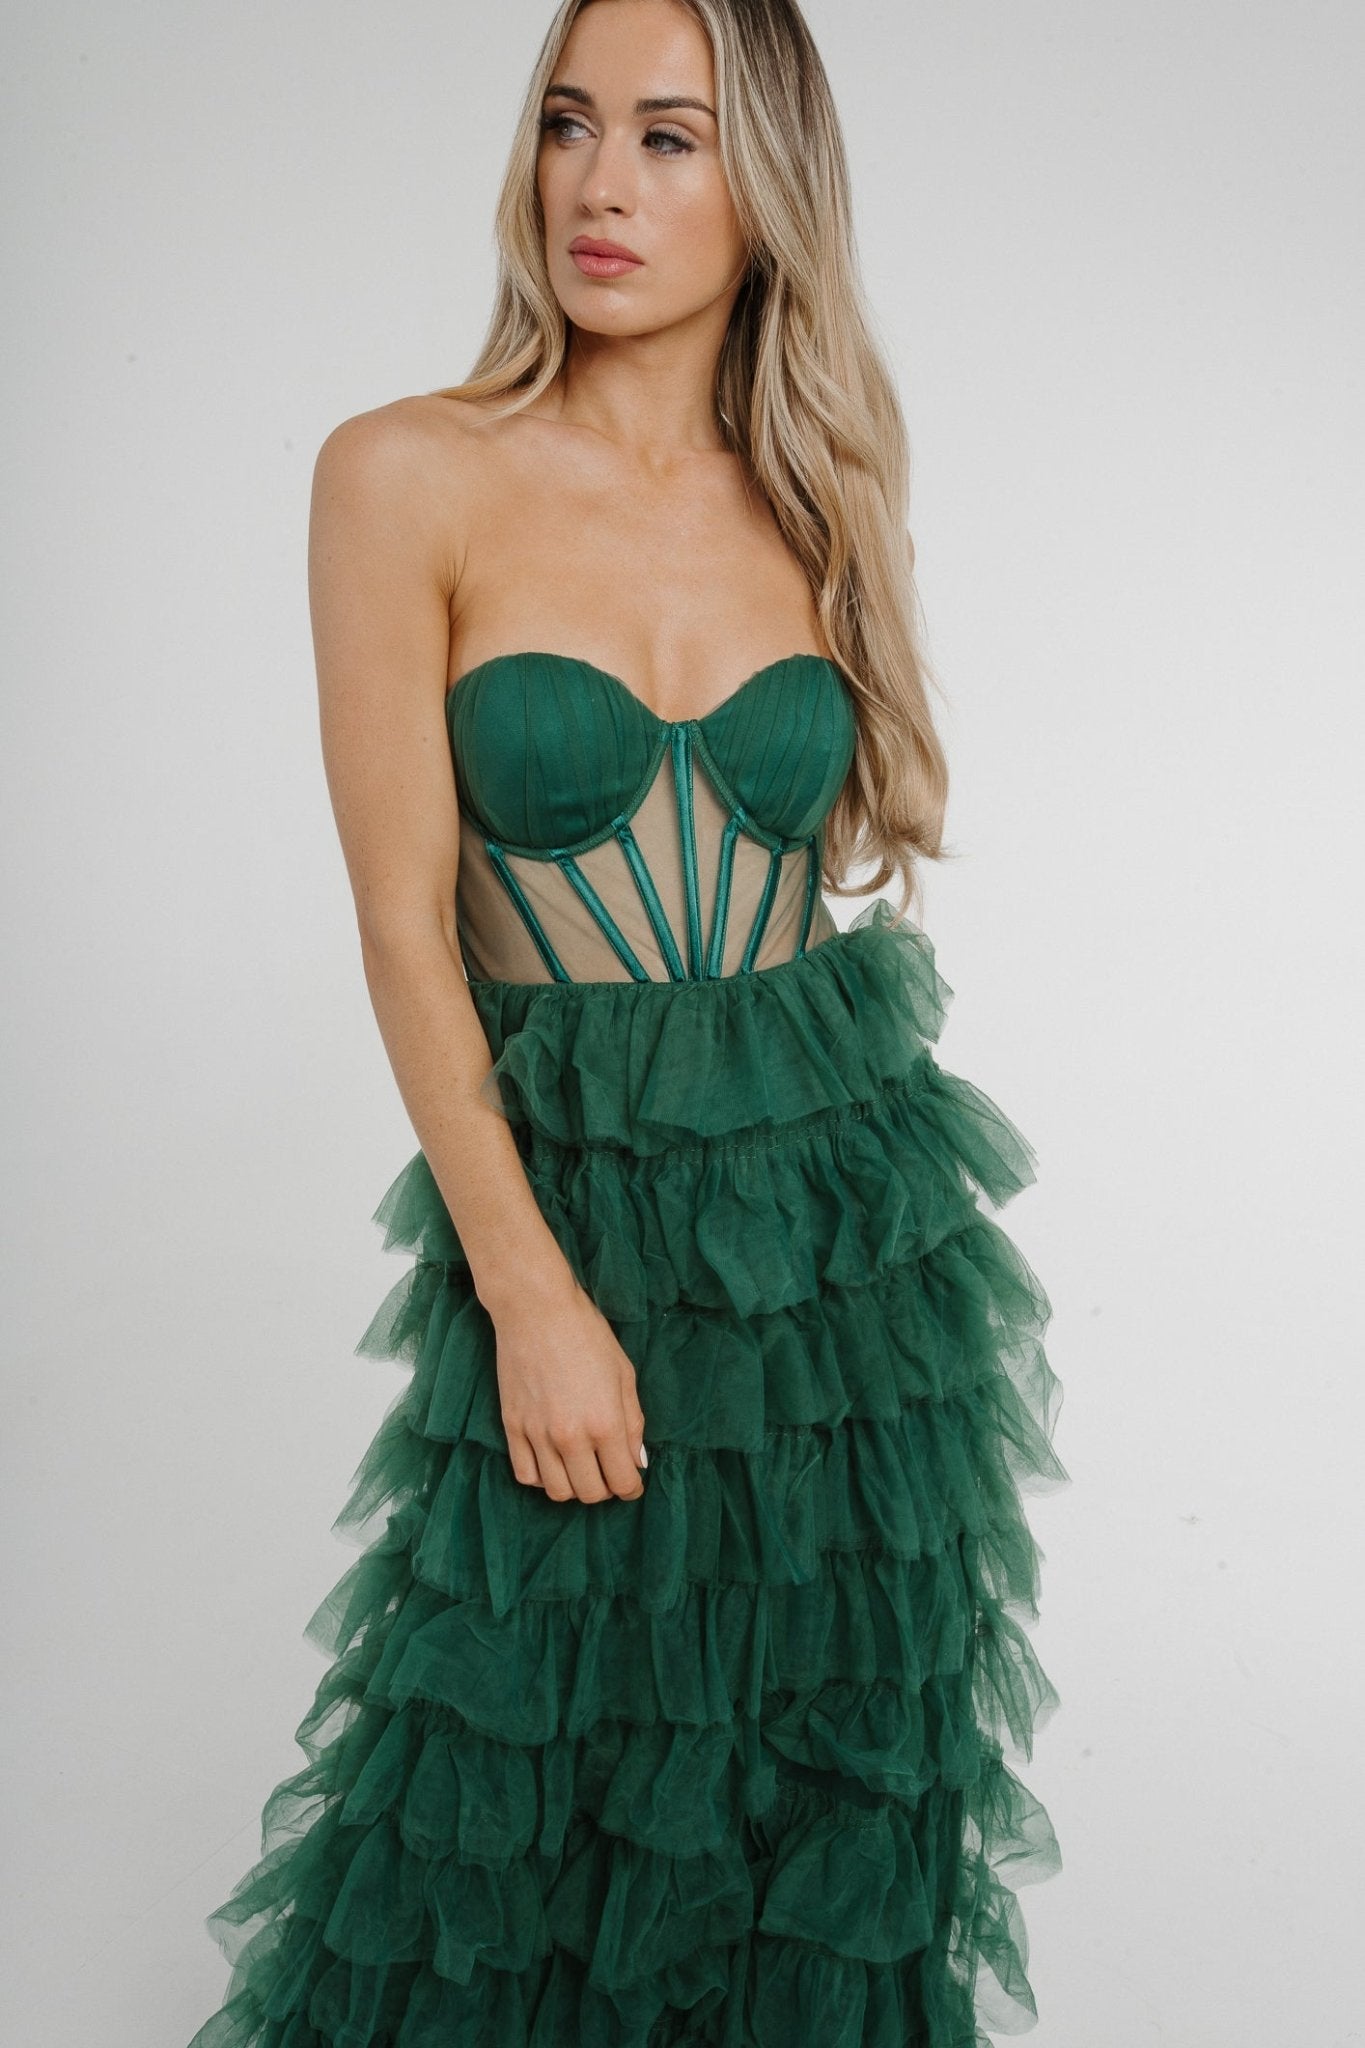 Holly Strapless Tulle Maxi Dress In Green - The Walk in Wardrobe